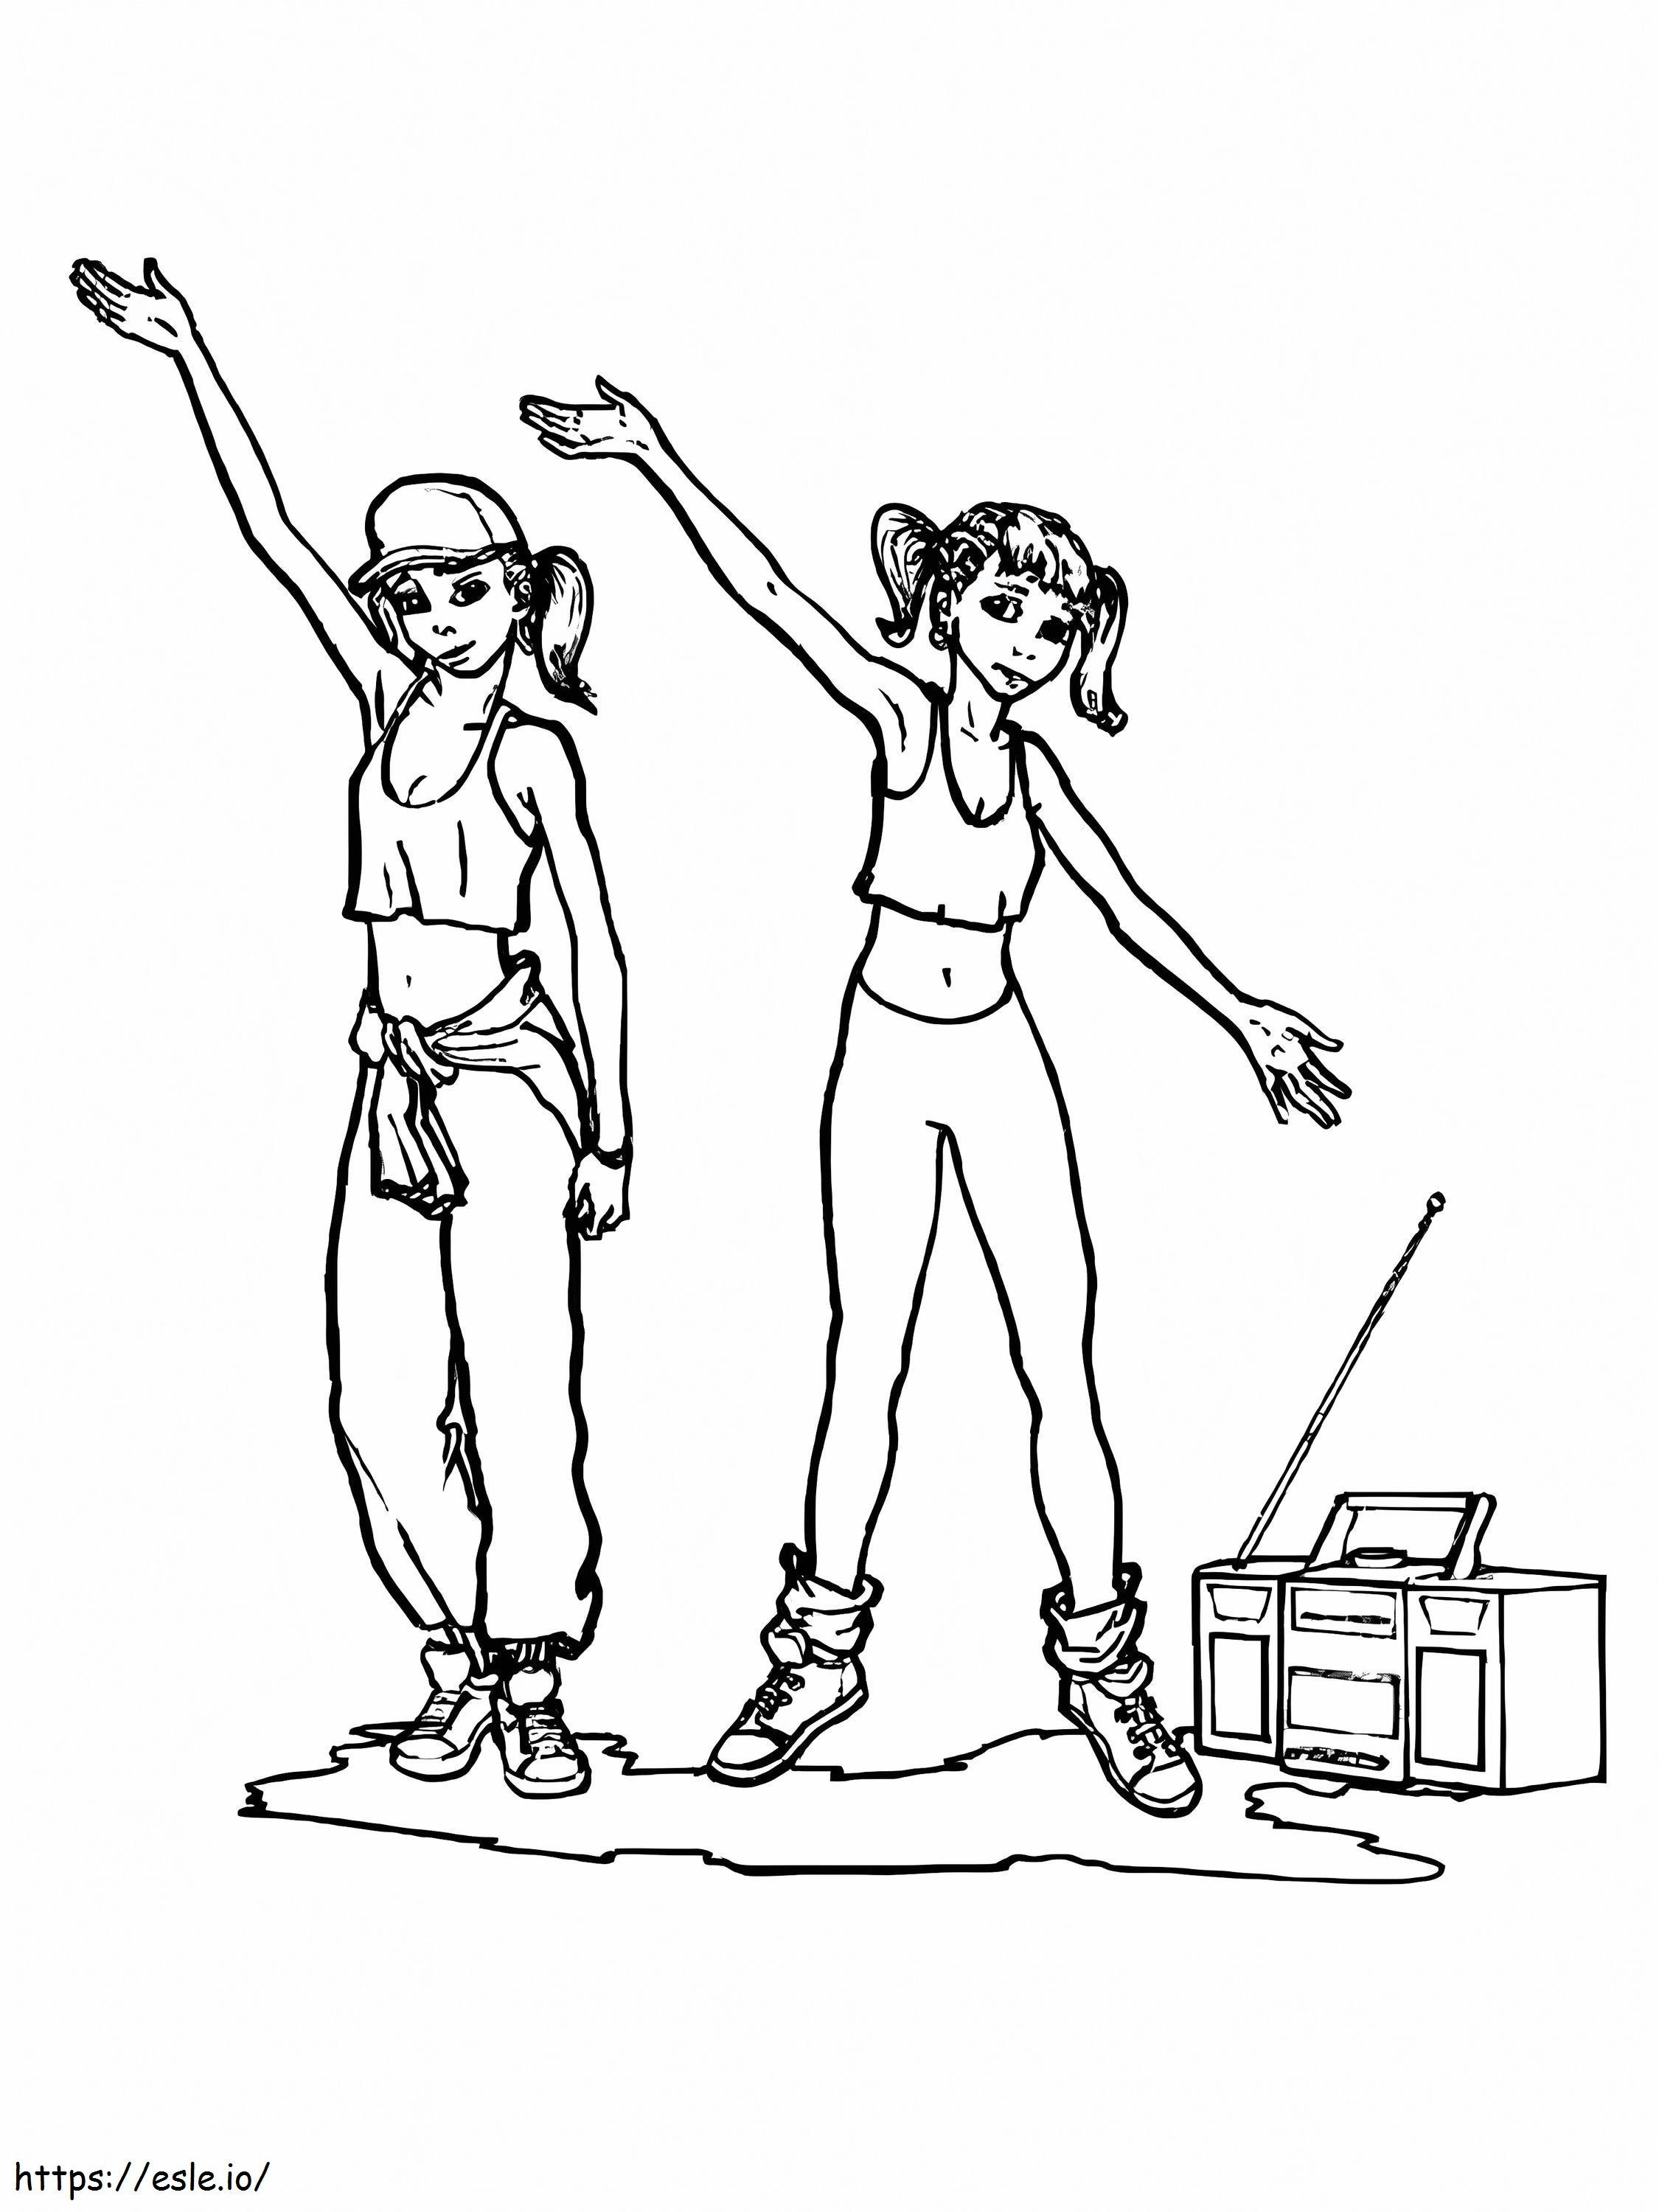 Tap Dance coloring page